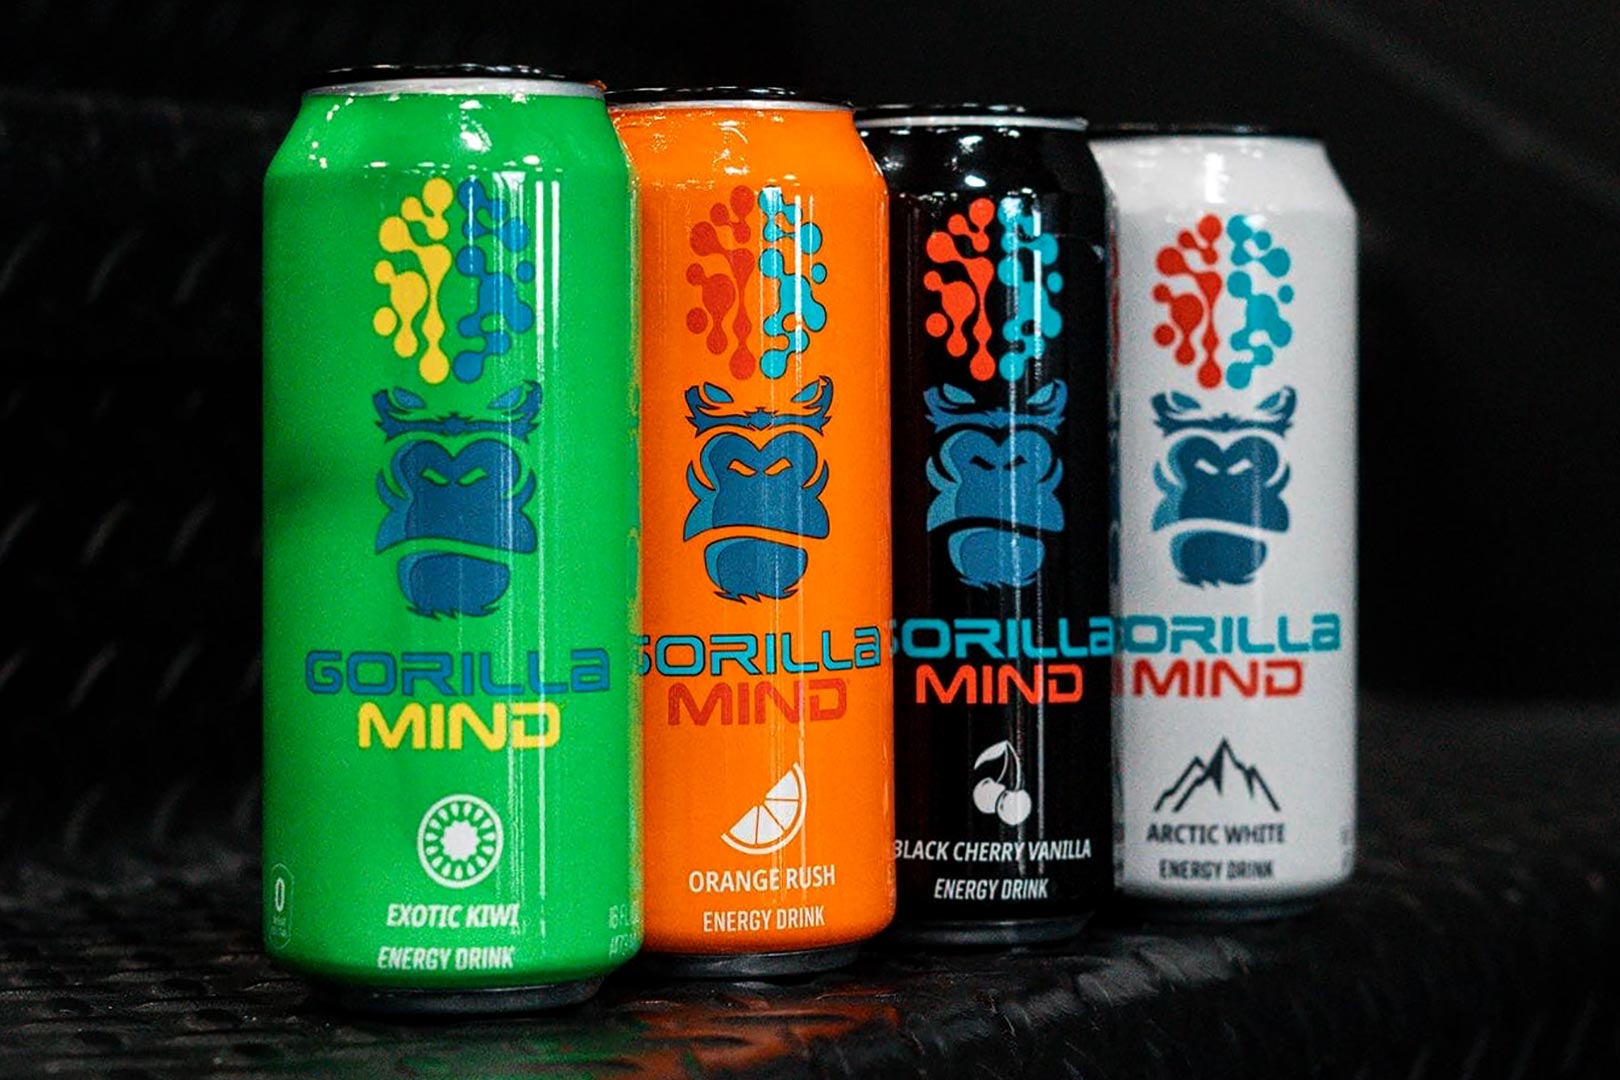 Gorilla Mind Continuing Its Monthly Energy Drink Flavors